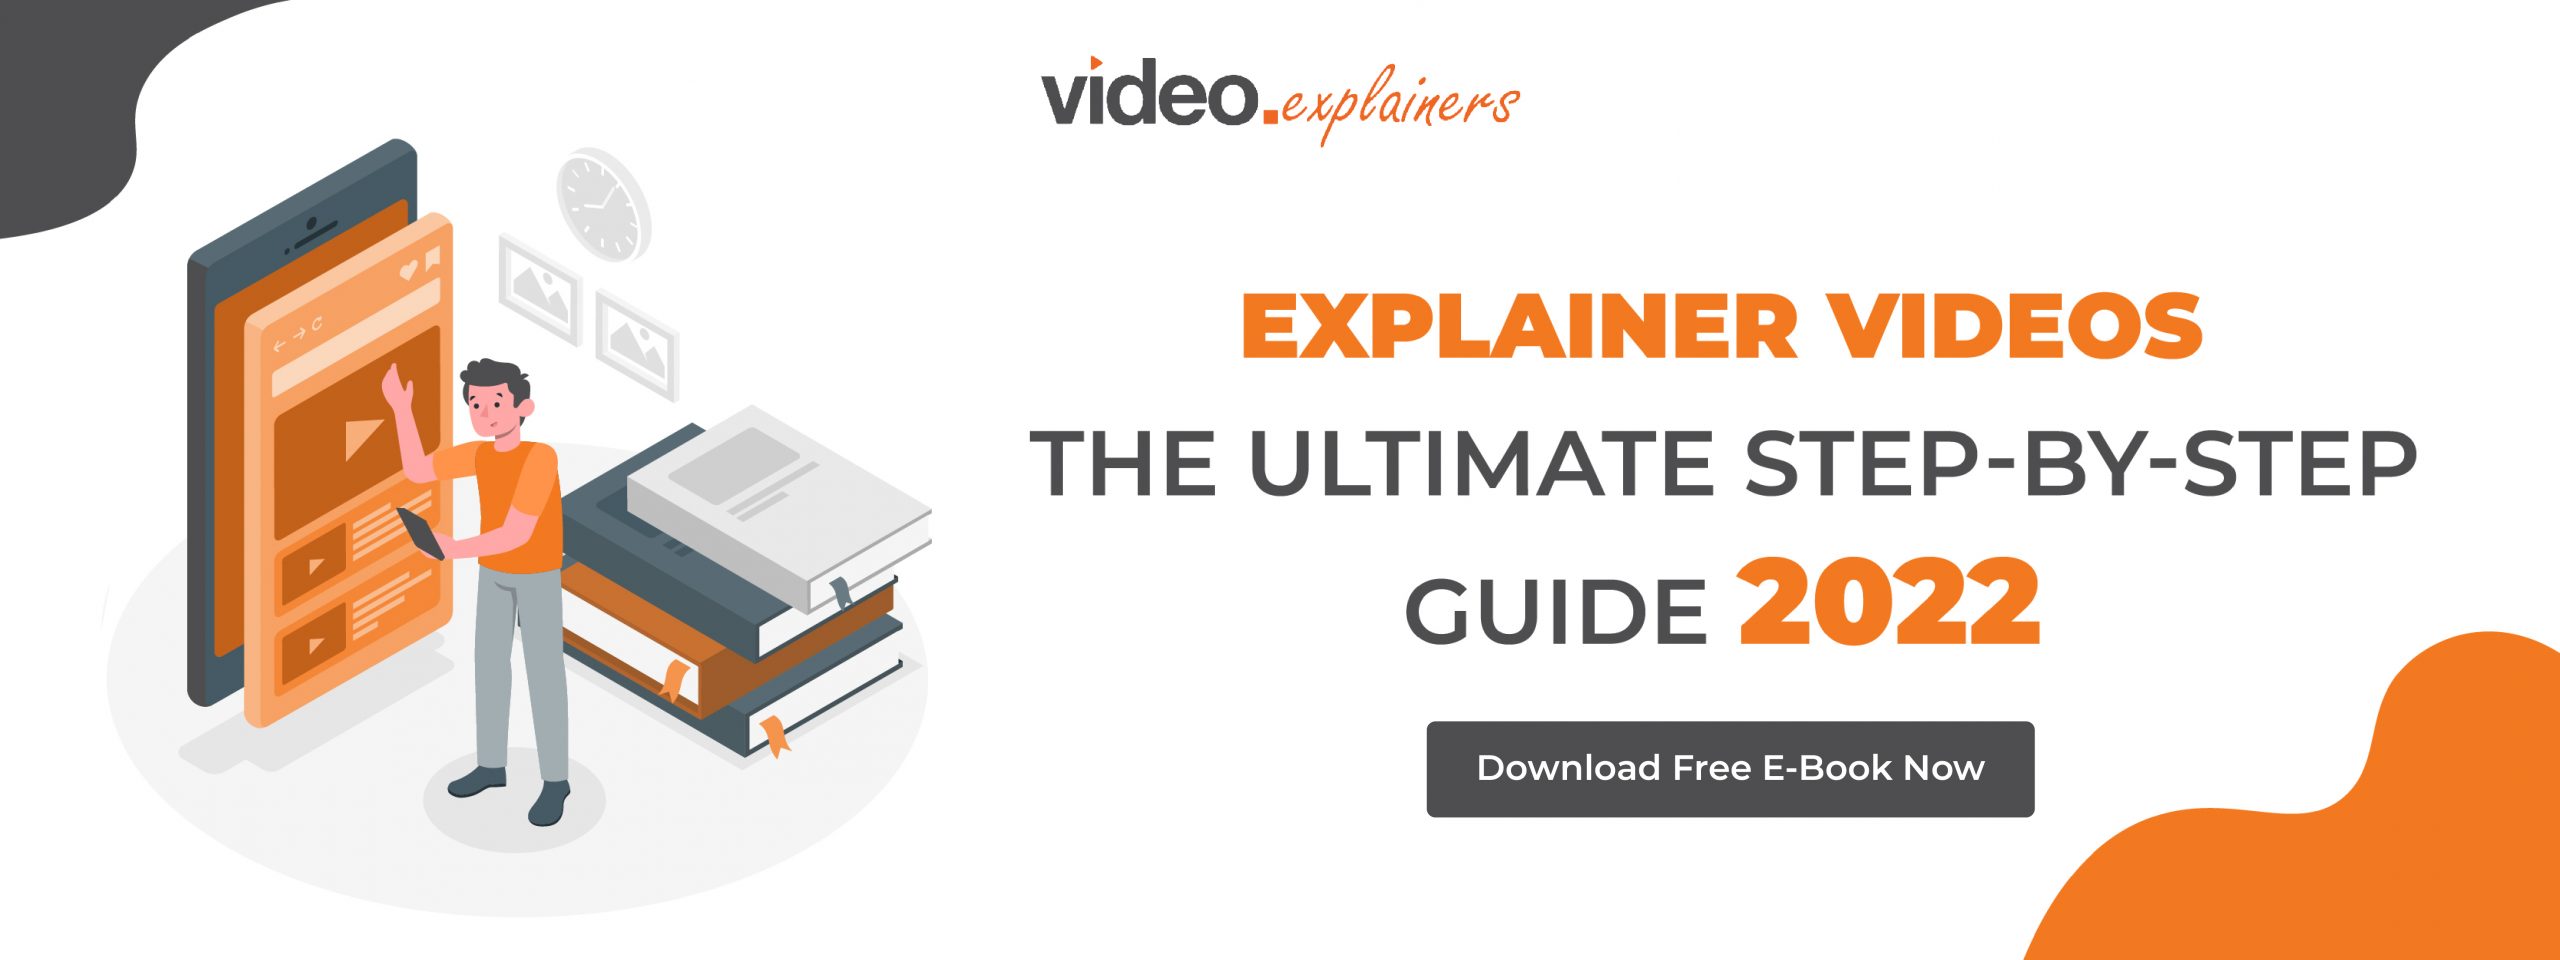 29 7 useful tips to write your animated explainer video script 2022